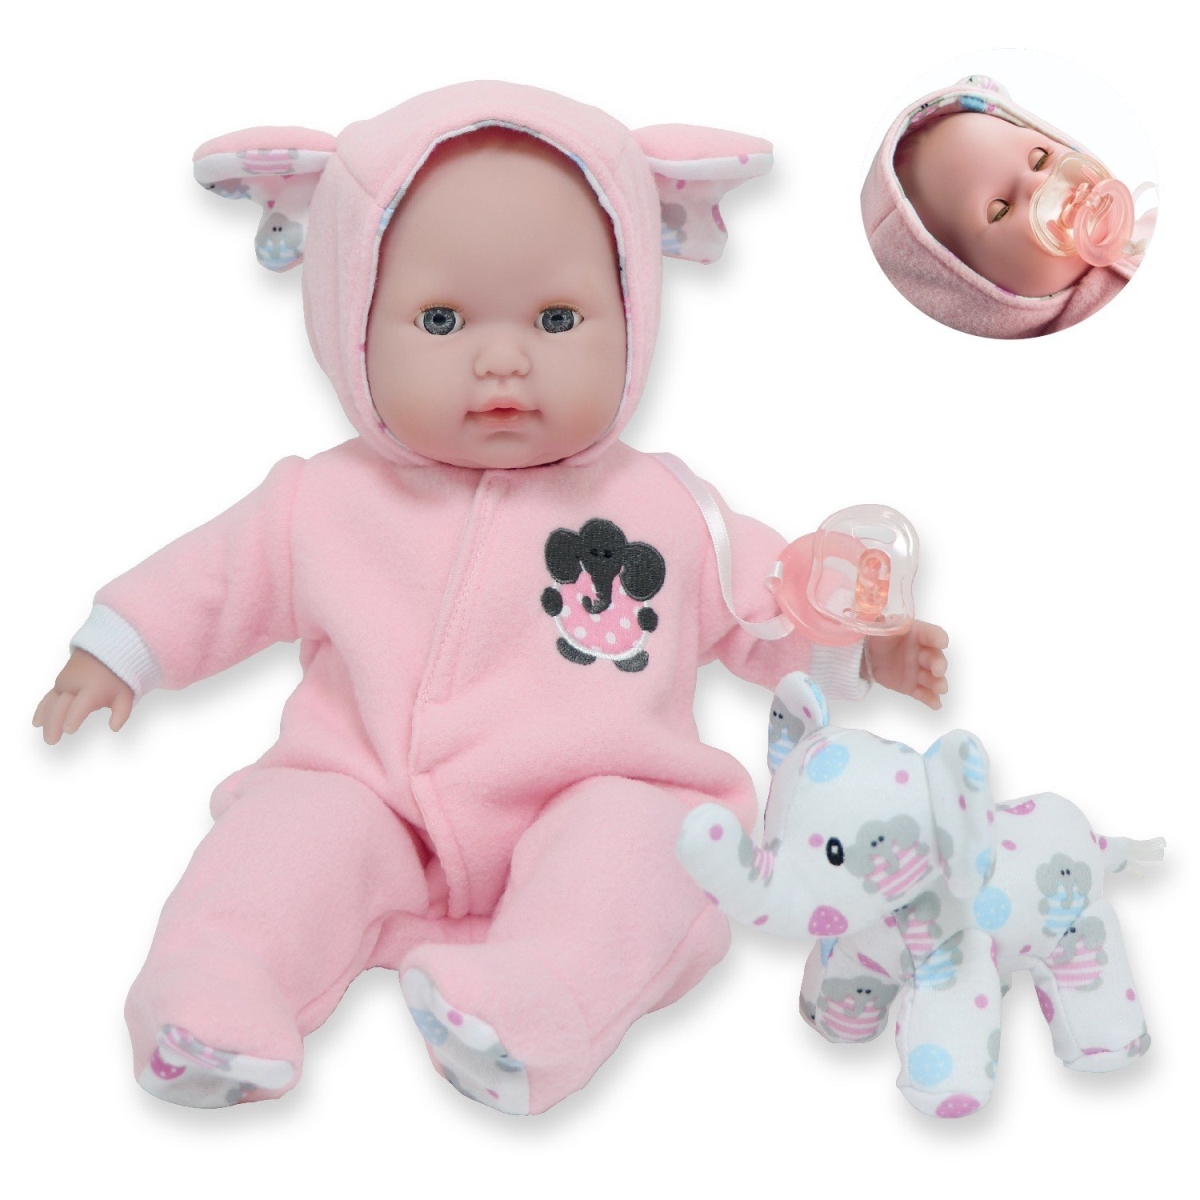 Picture of Berenguer Boutique Pink Soft Body 15 in. Baby Doll for Open &amp; Close Eyes with Play Elephant for Children 2 Plus